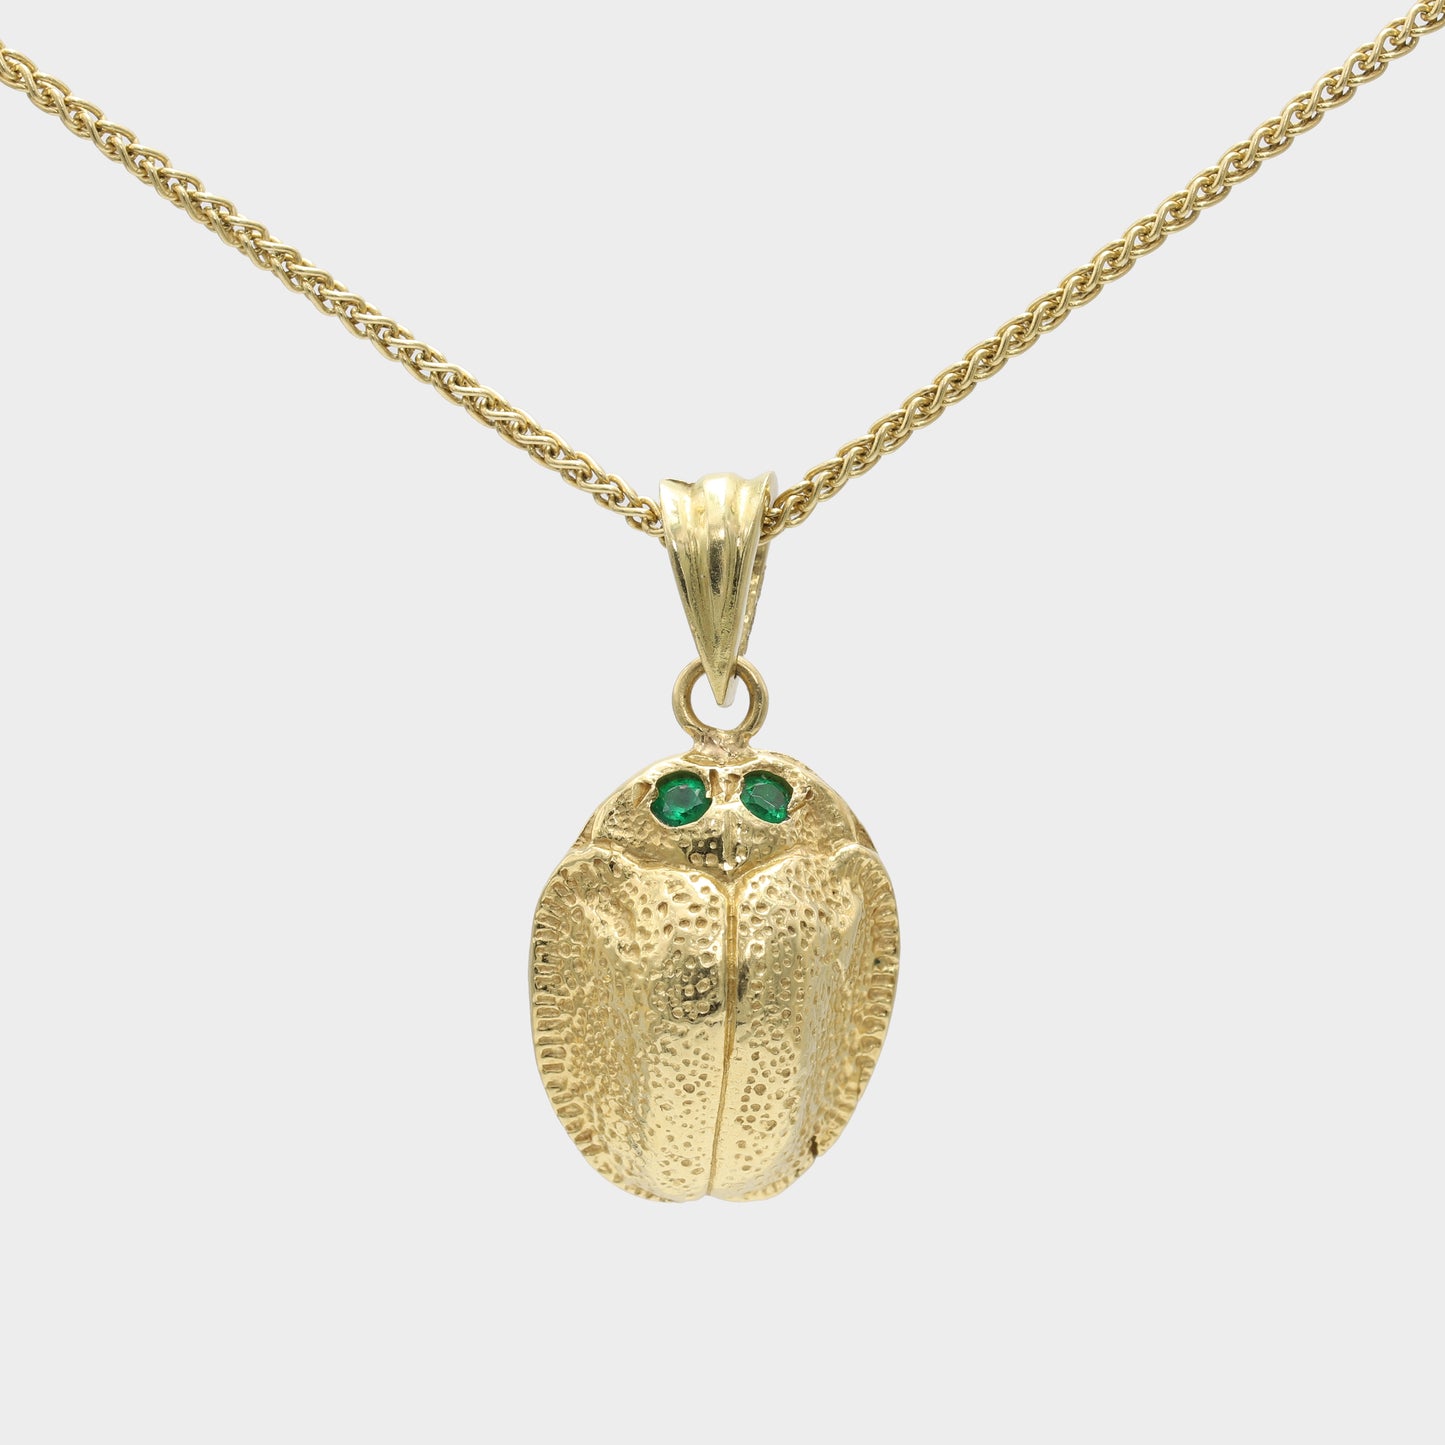 18ct Gold Scarab Necklace with Emerald Eyes